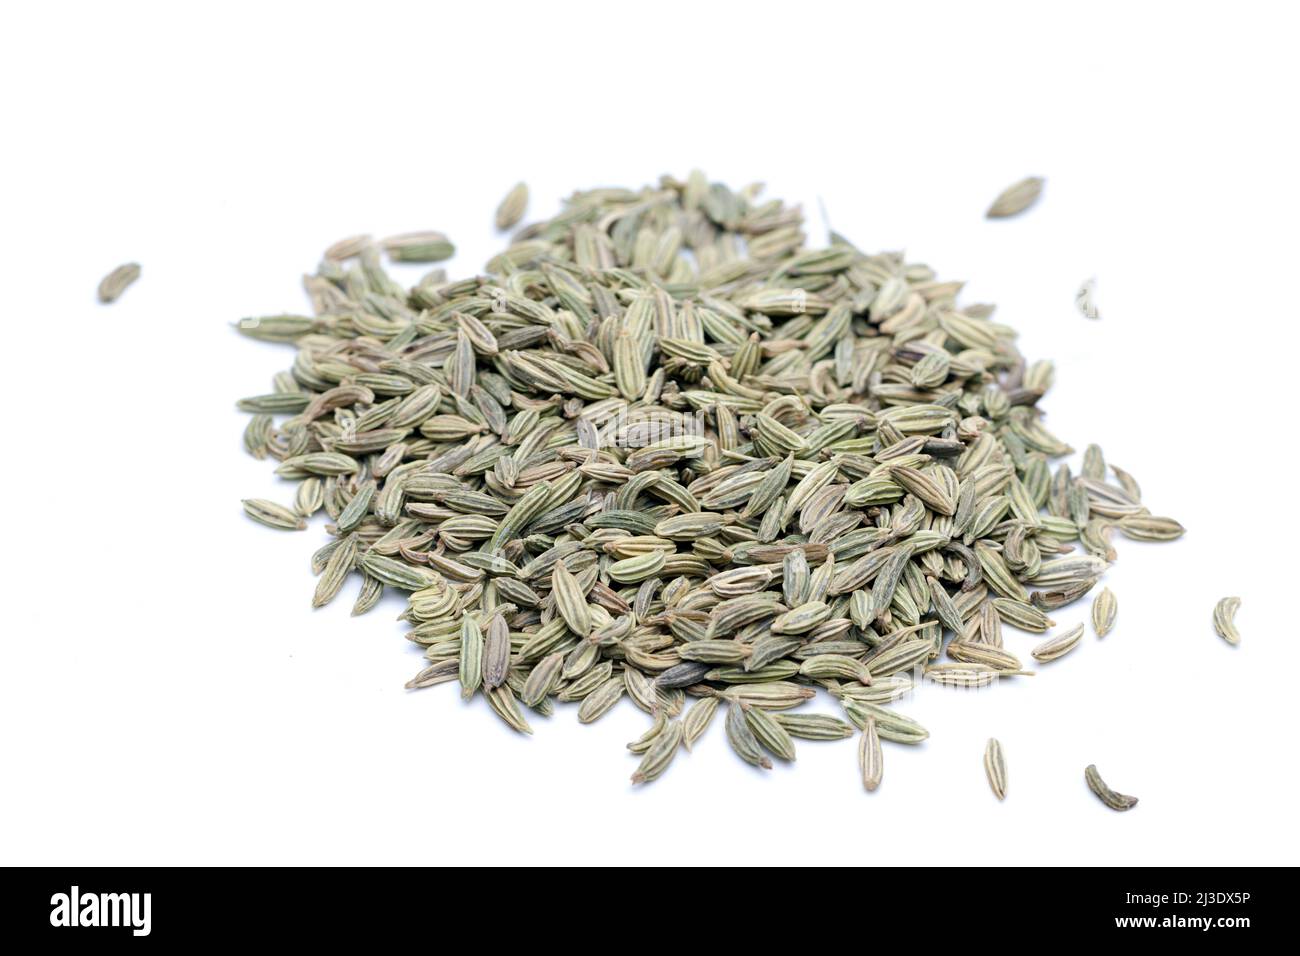 Pile of Fennel Seeds Stock Photo